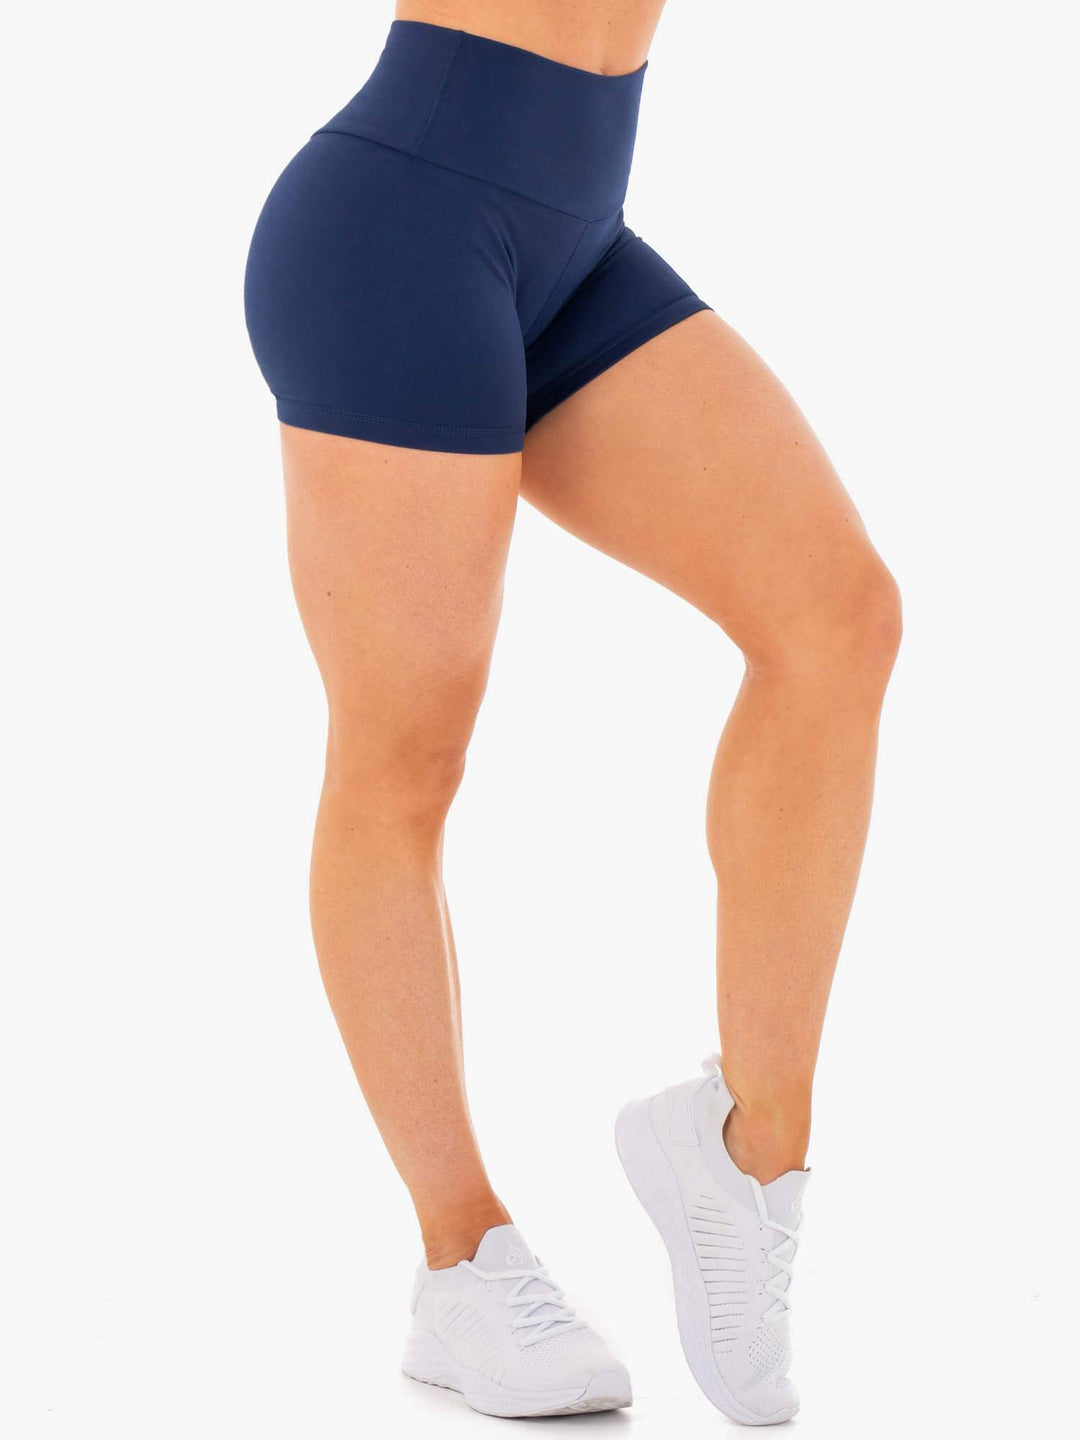 Motion High Waisted Shorts - Navy Clothing Ryderwear 